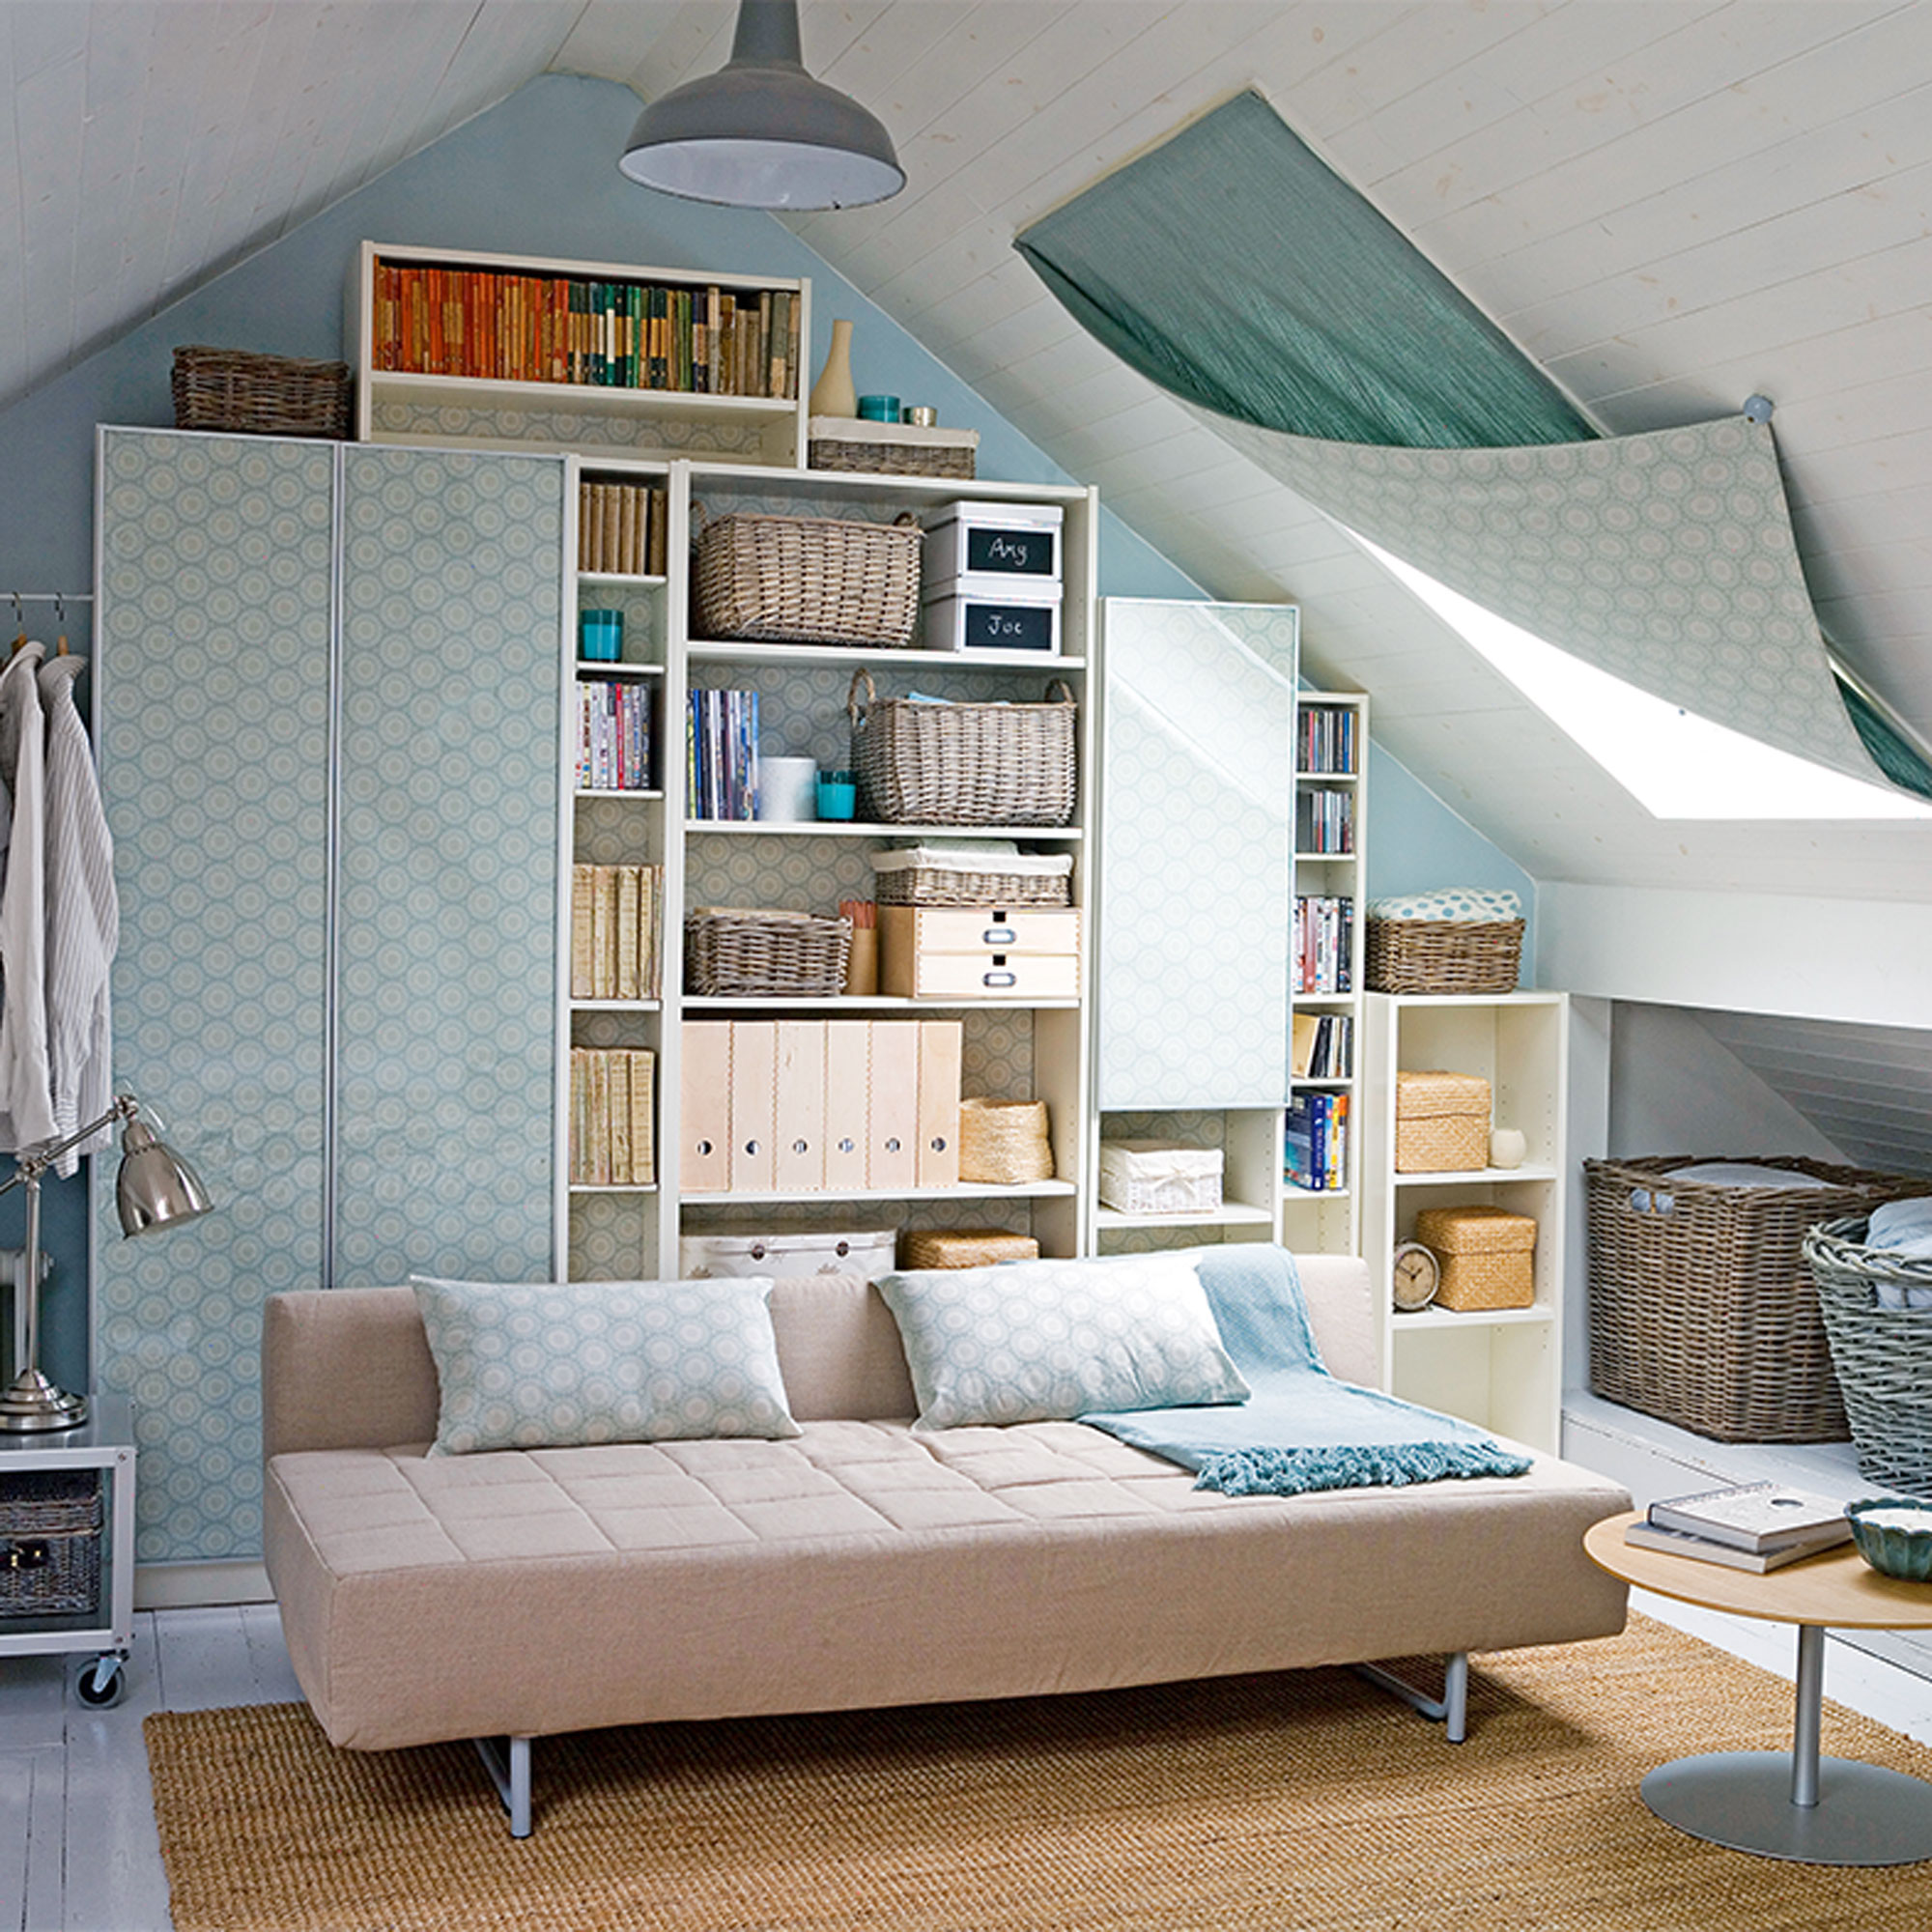 Loft bedroom with open and closed storage